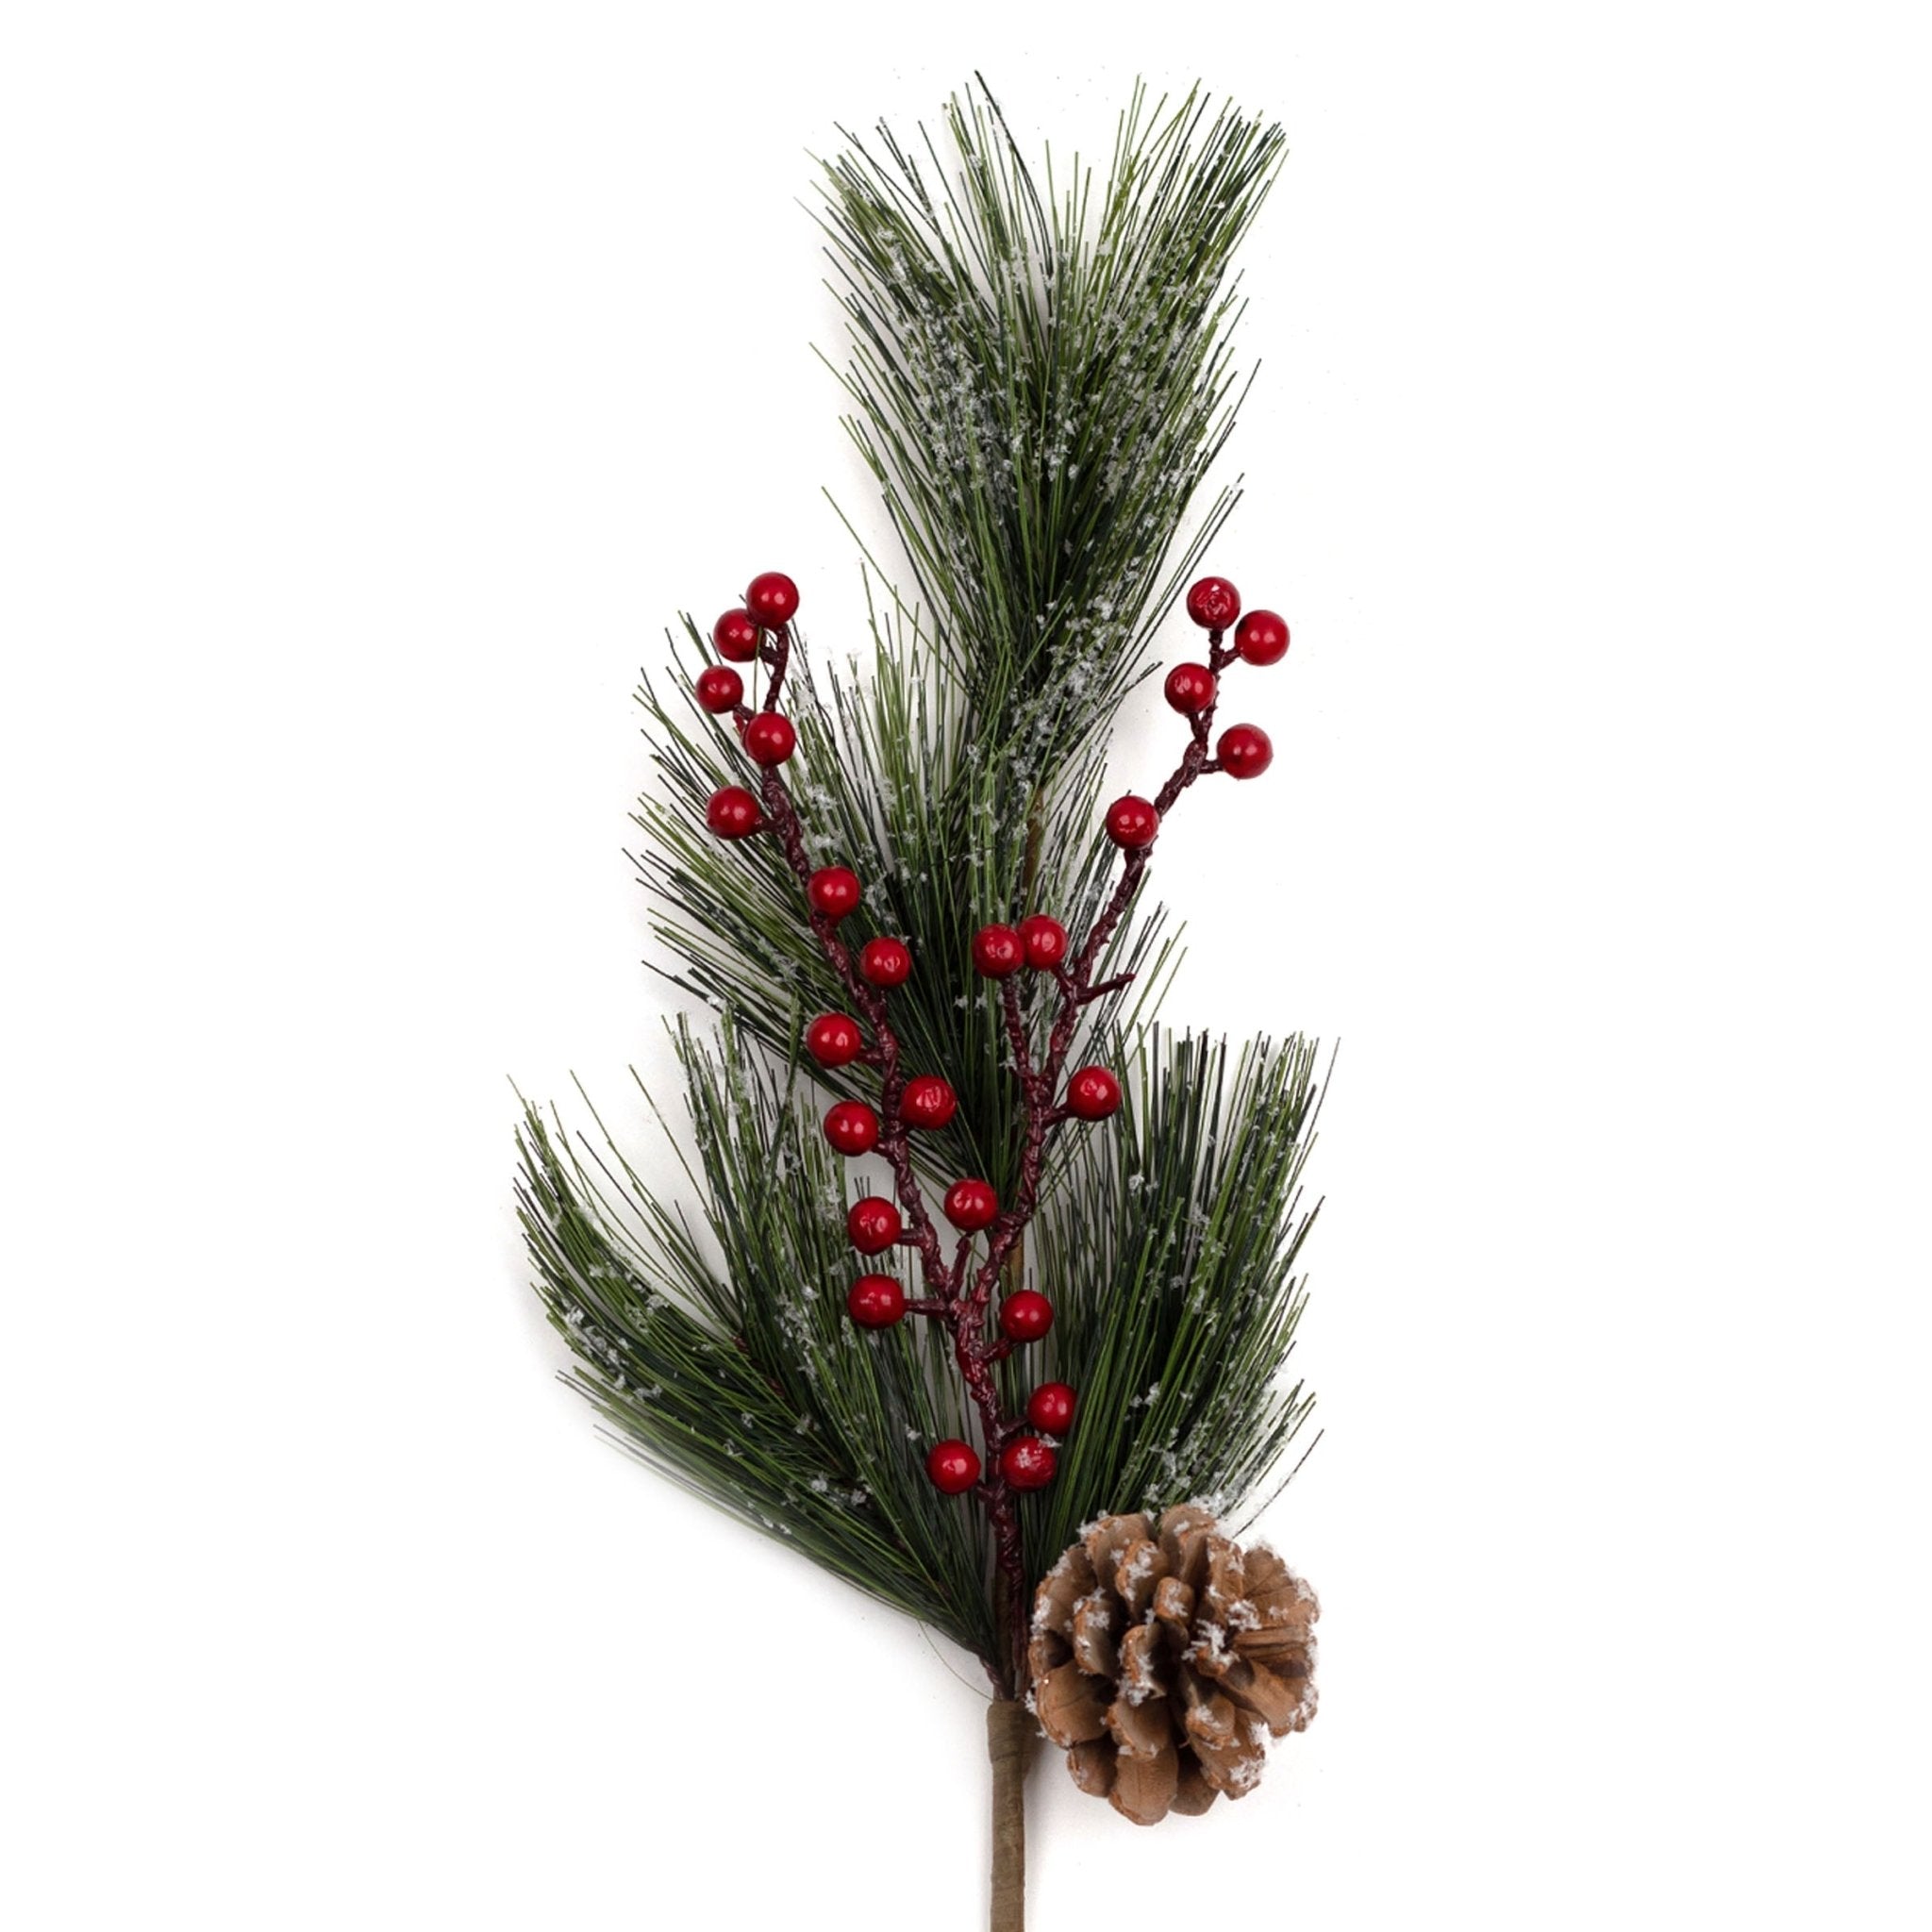 56cm Faux Pine with Pine Cone and Red Berries Pick 00301 - MODA FLORA Santa's Workshop